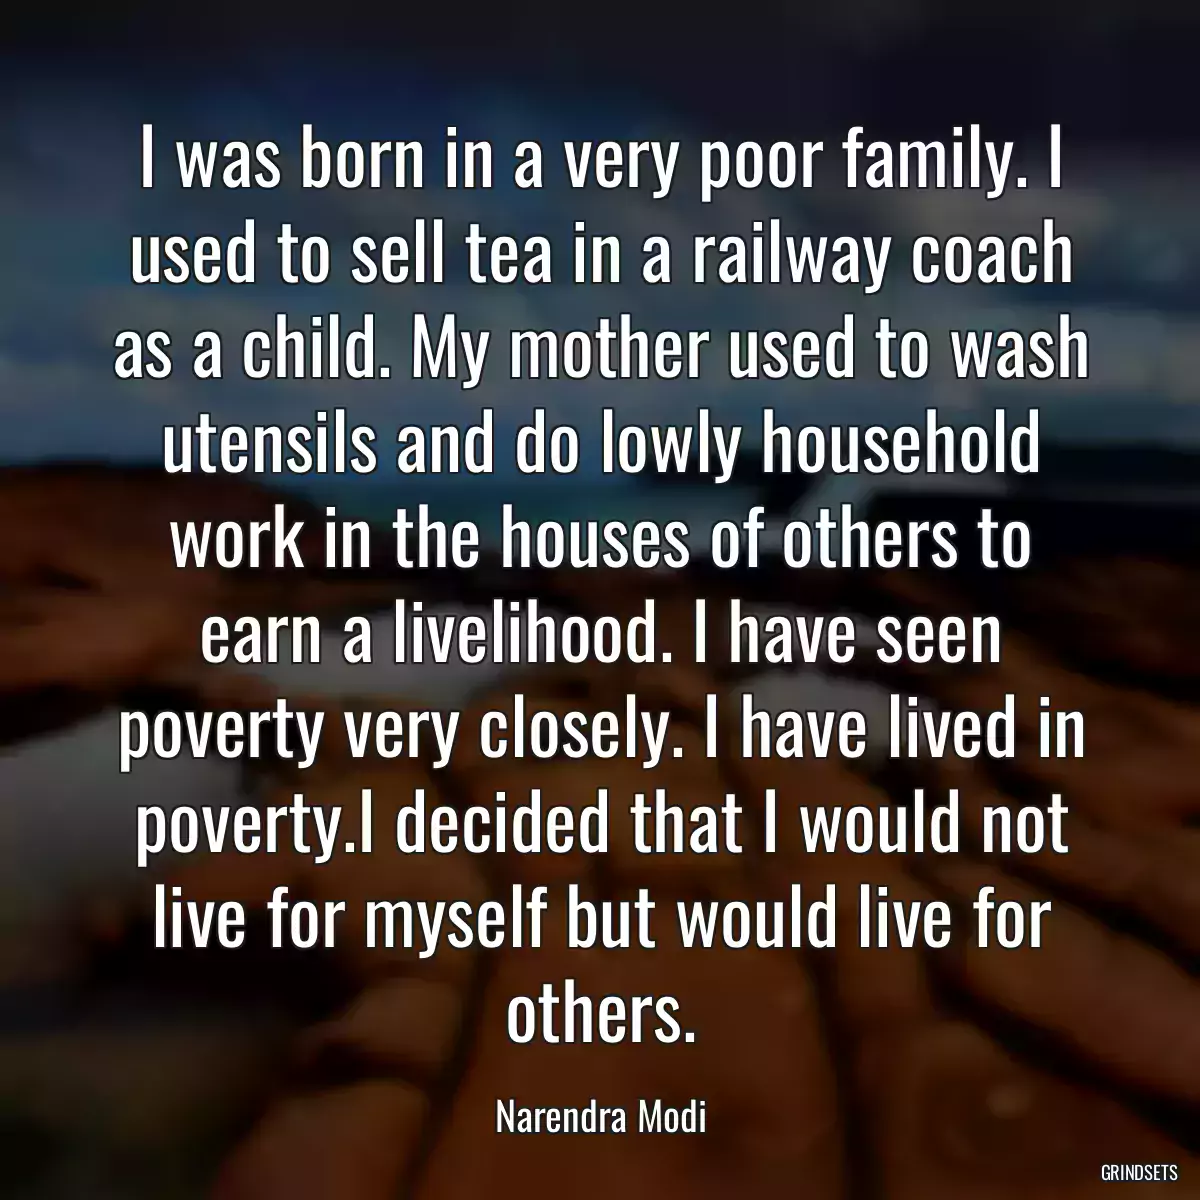 I was born in a very poor family. I used to sell tea in a railway coach as a child. My mother used to wash utensils and do lowly household work in the houses of others to earn a livelihood. I have seen poverty very closely. I have lived in poverty.I decided that I would not live for myself but would live for others.